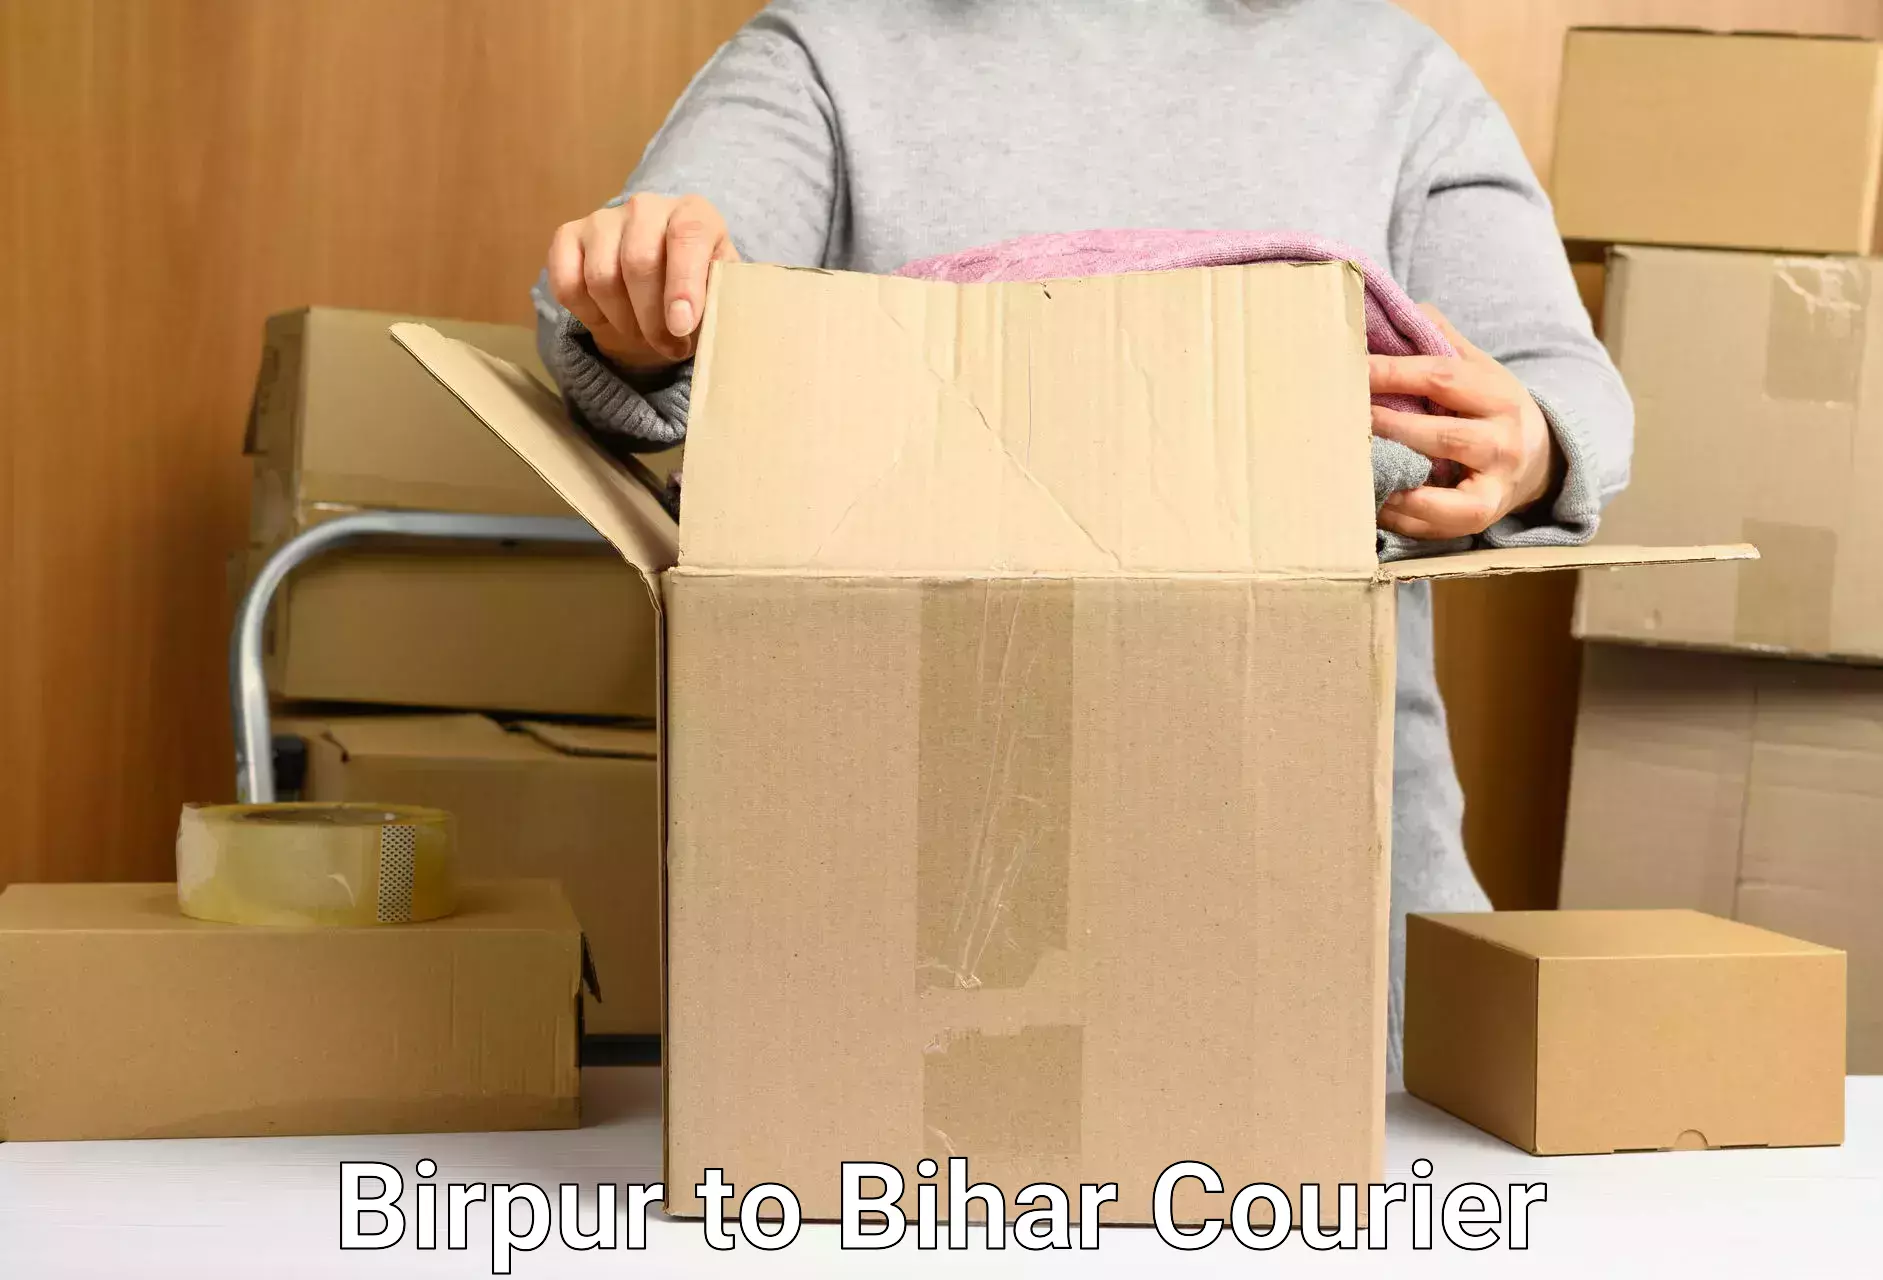 Specialized courier services in Birpur to Bihar